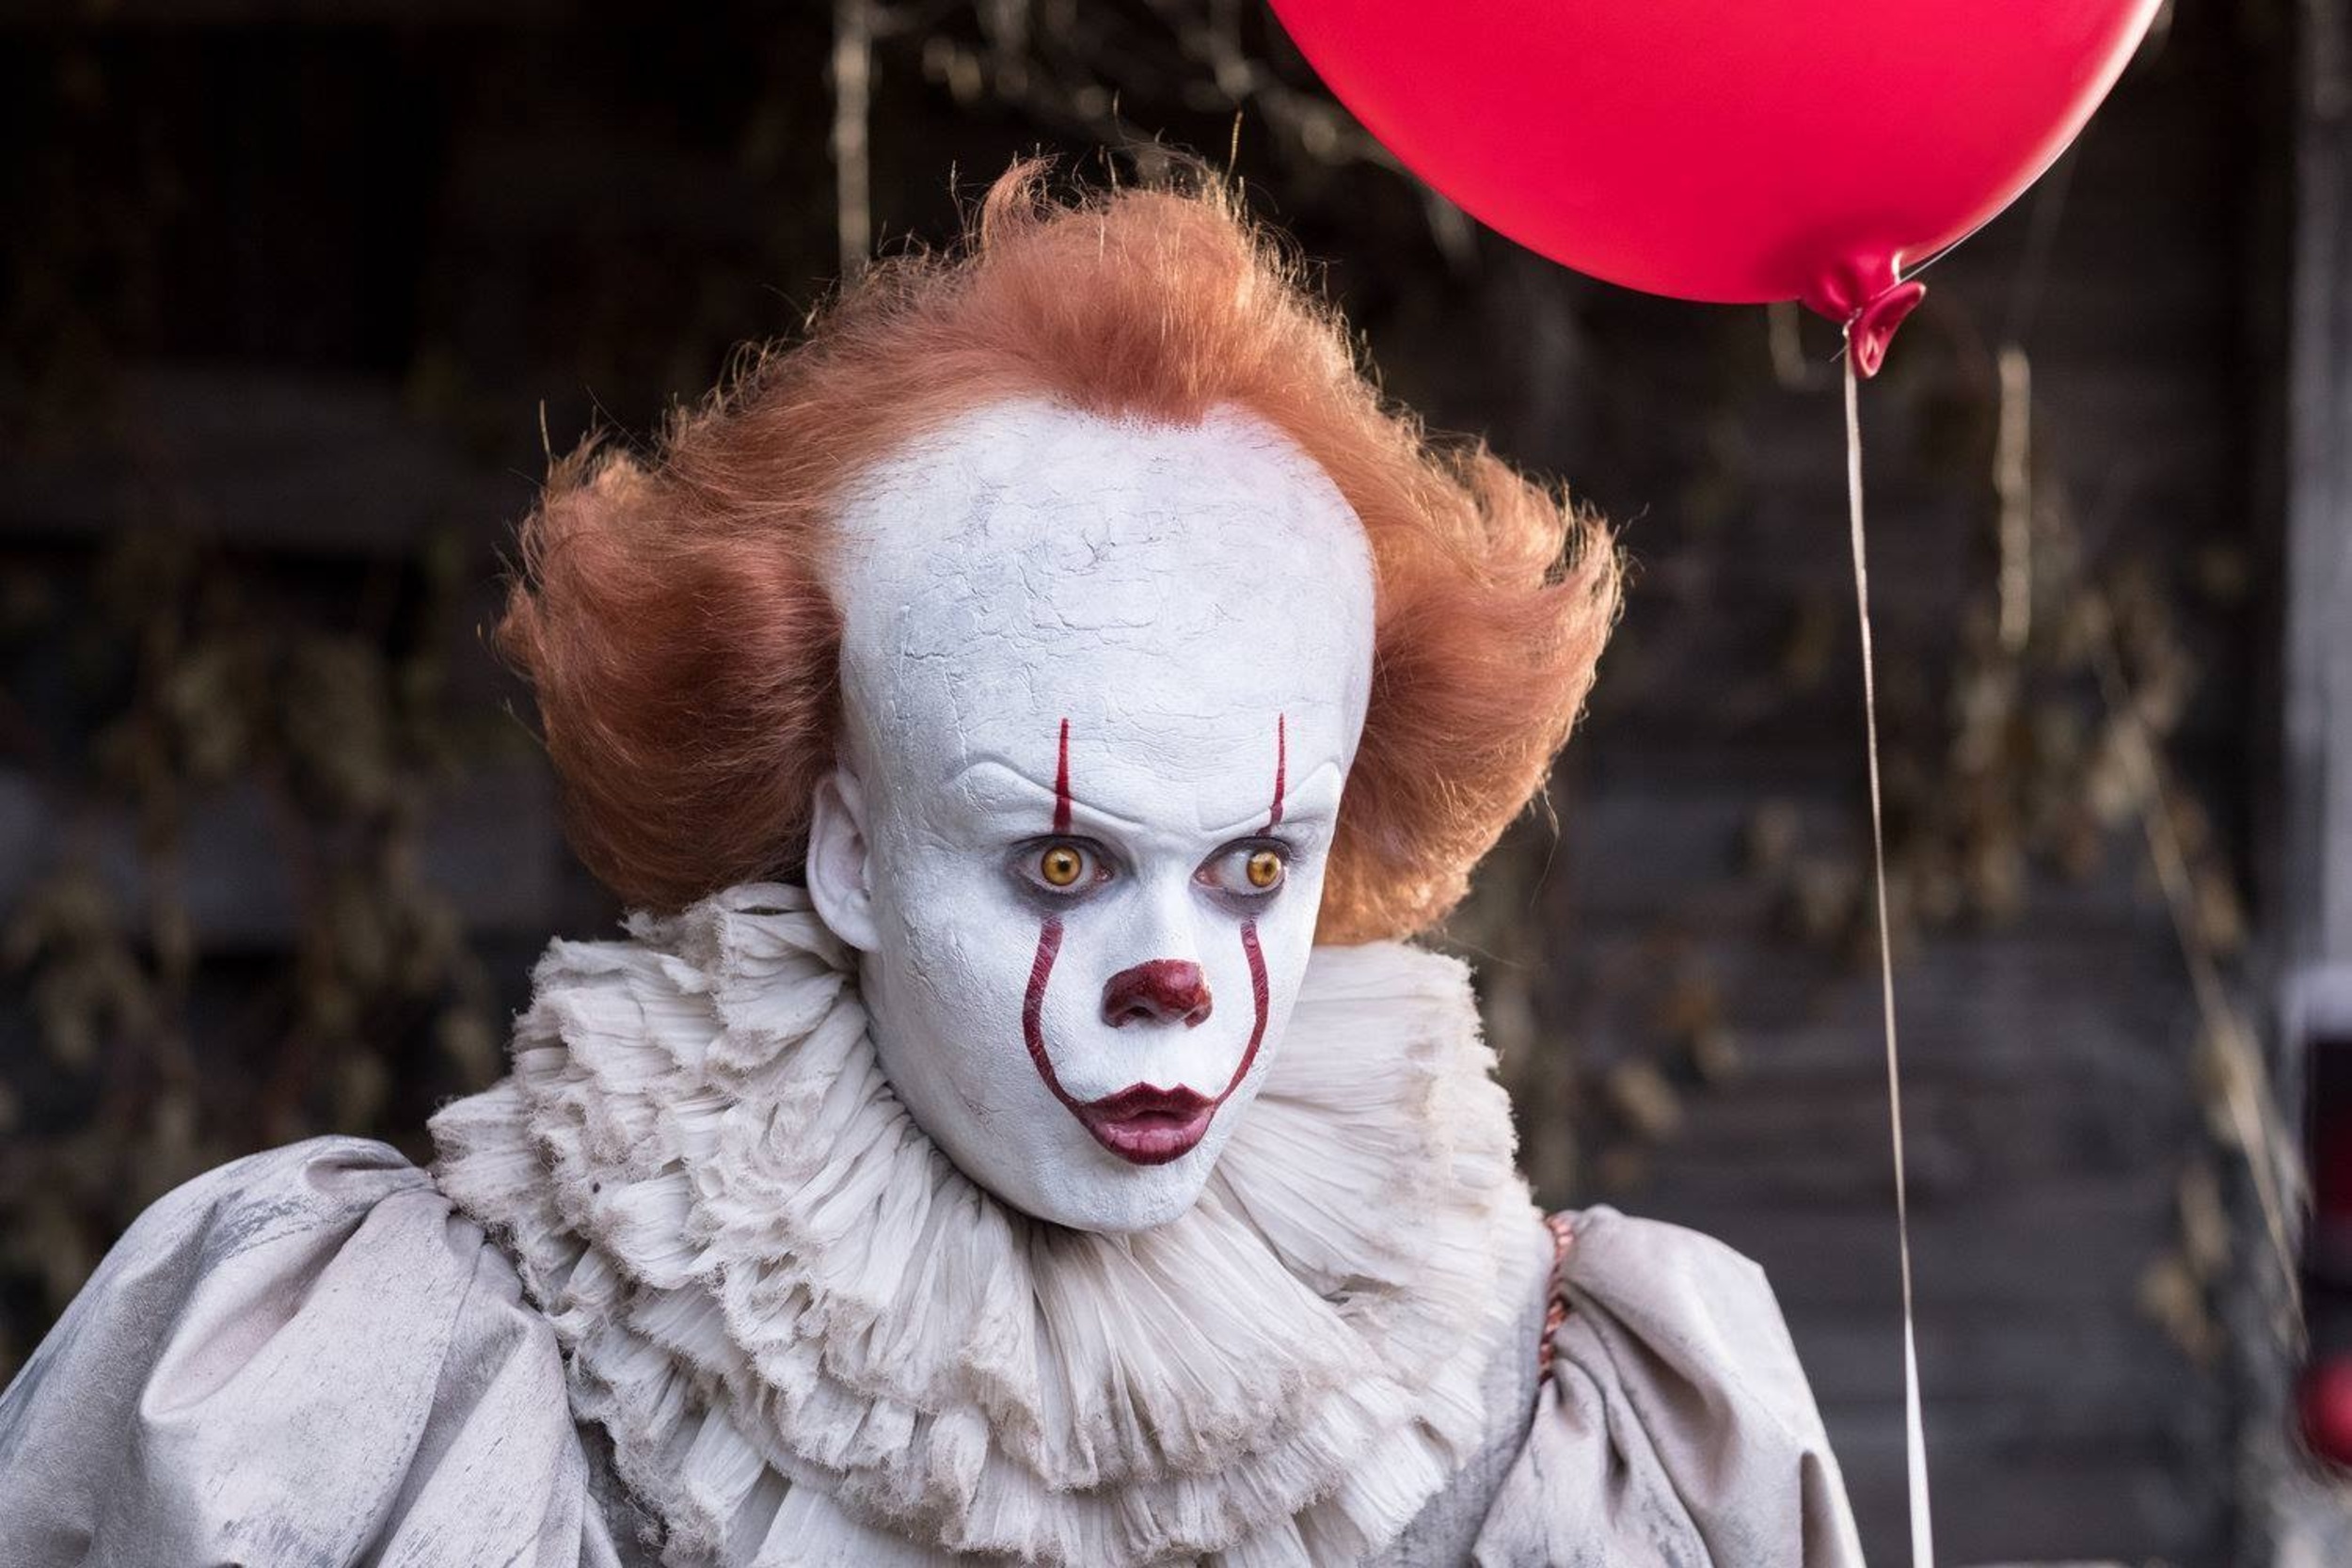 <p>In 2016, in a widely publicized instance of mass hysteria, people around the world reported seeing creepy clowns pop up in various places in their communities. This terrified many folks, but as fans of clown movies, we were delighted by most of the sightings. If you enjoy this horror subgenre as much as we do, be sure your streaming queue includes the 21 best films and franchises featuring scary clowns.</p>